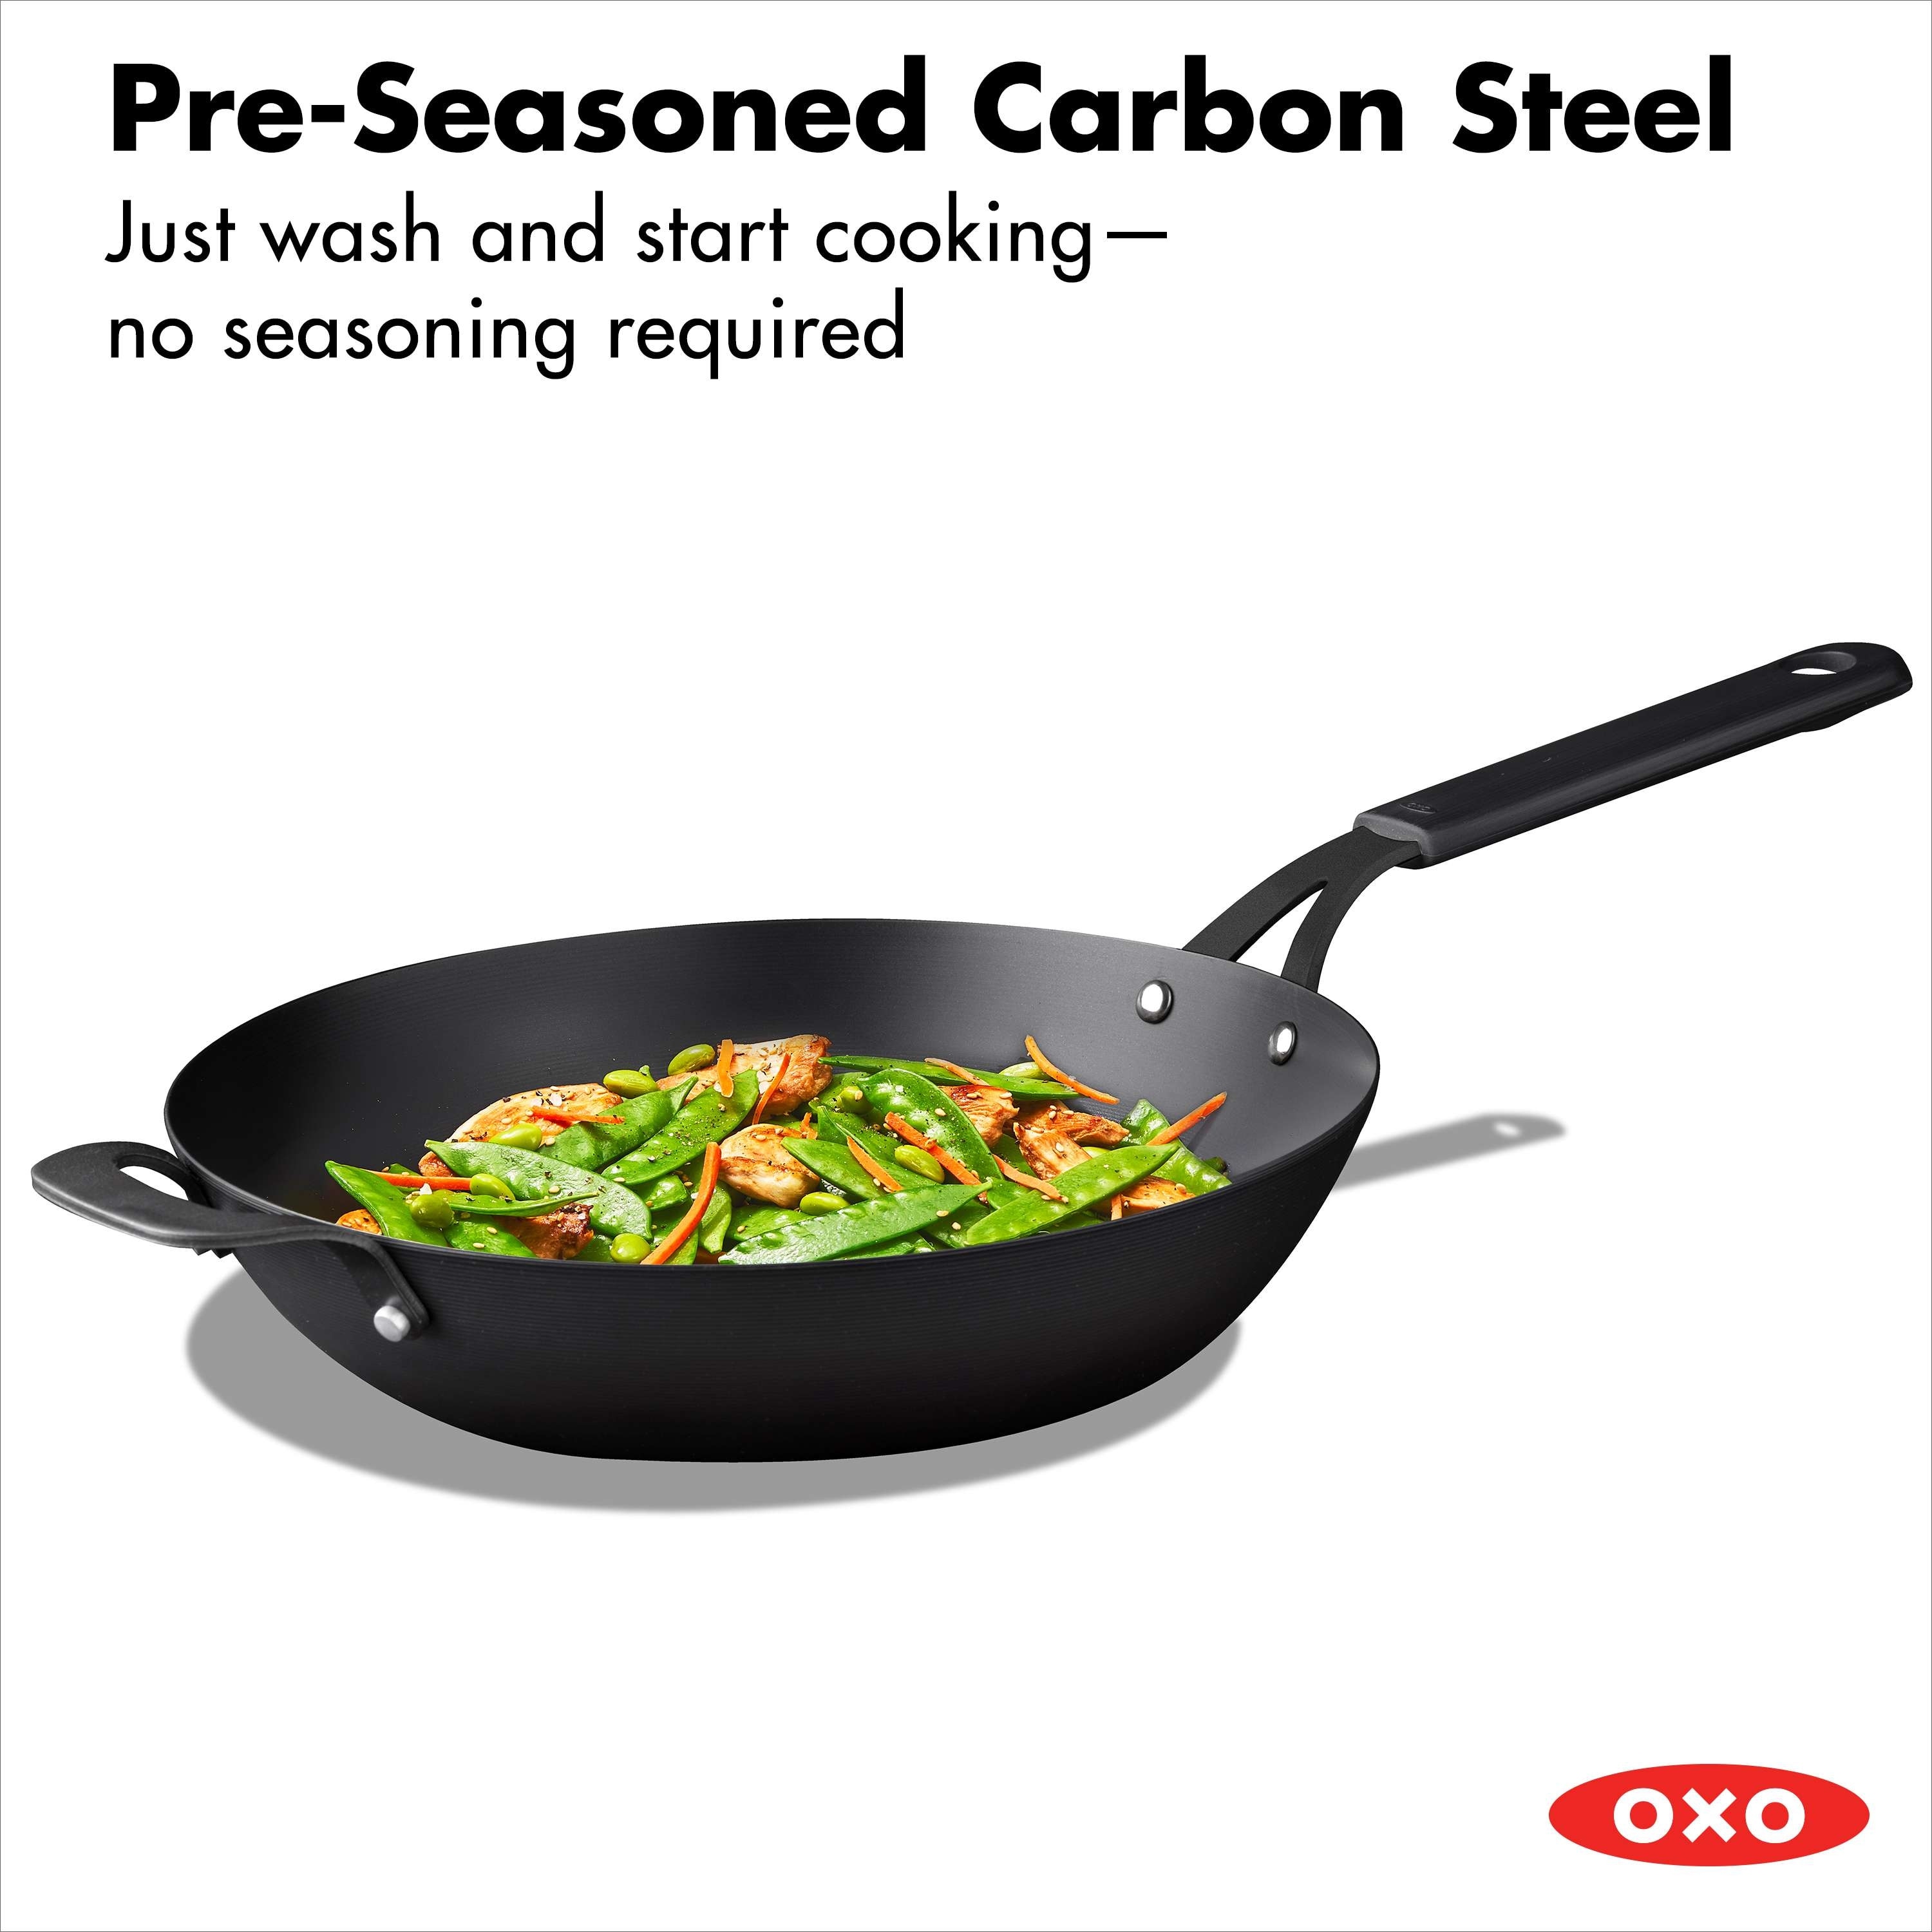 https://ak1.ostkcdn.com/images/products/is/images/direct/0efbf633ae30dd3fecc1743be6554b58c0b0ce1f/OXO-Black-Steel-12%22-Wok-with-Helper-Handle-%26-Silicone-Sleeve.jpg